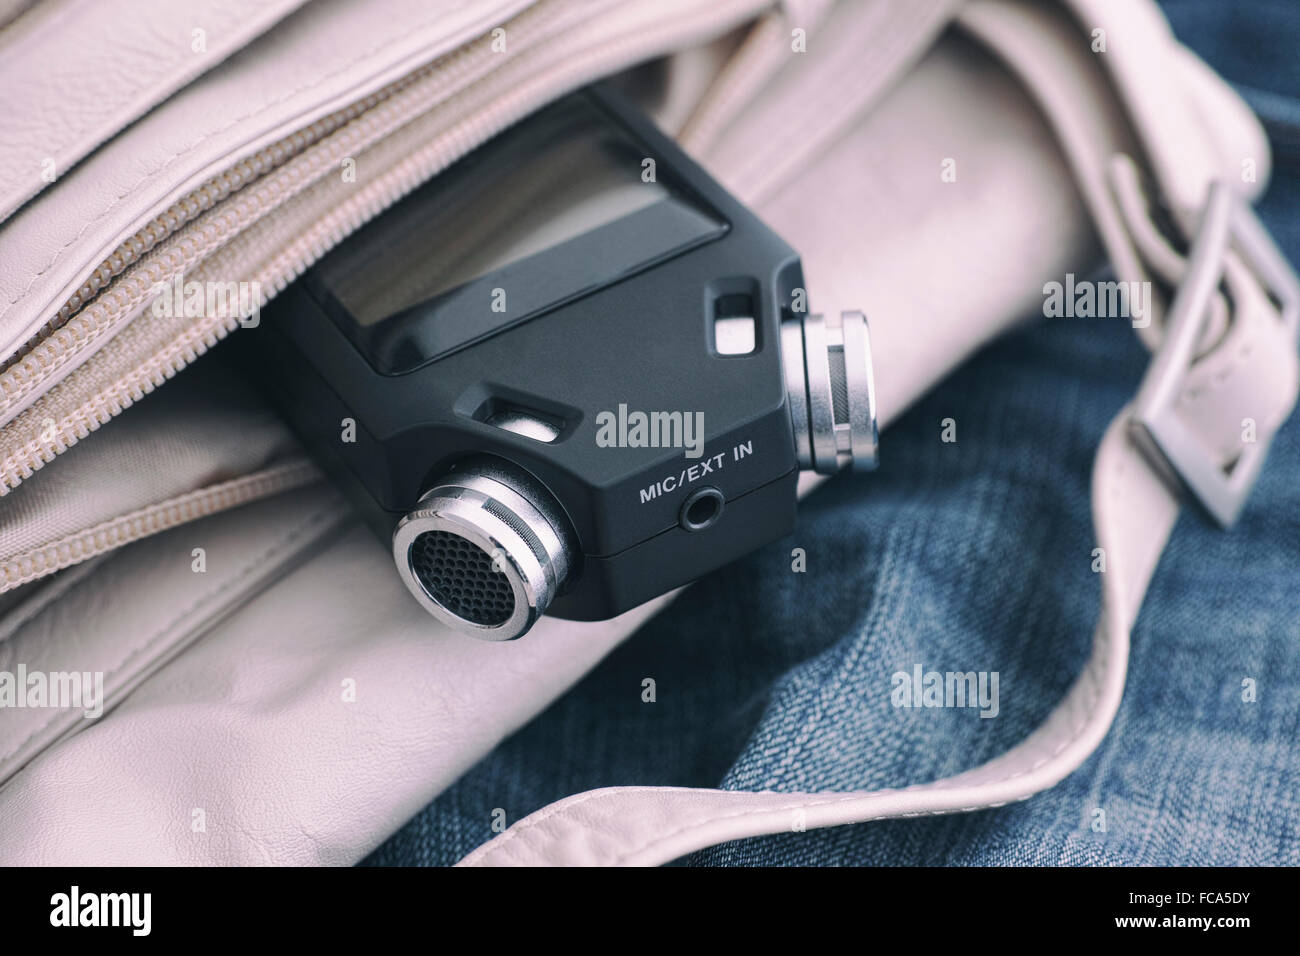 Voice recorder (audio recorder) in a bag. Close up. Stock Photo